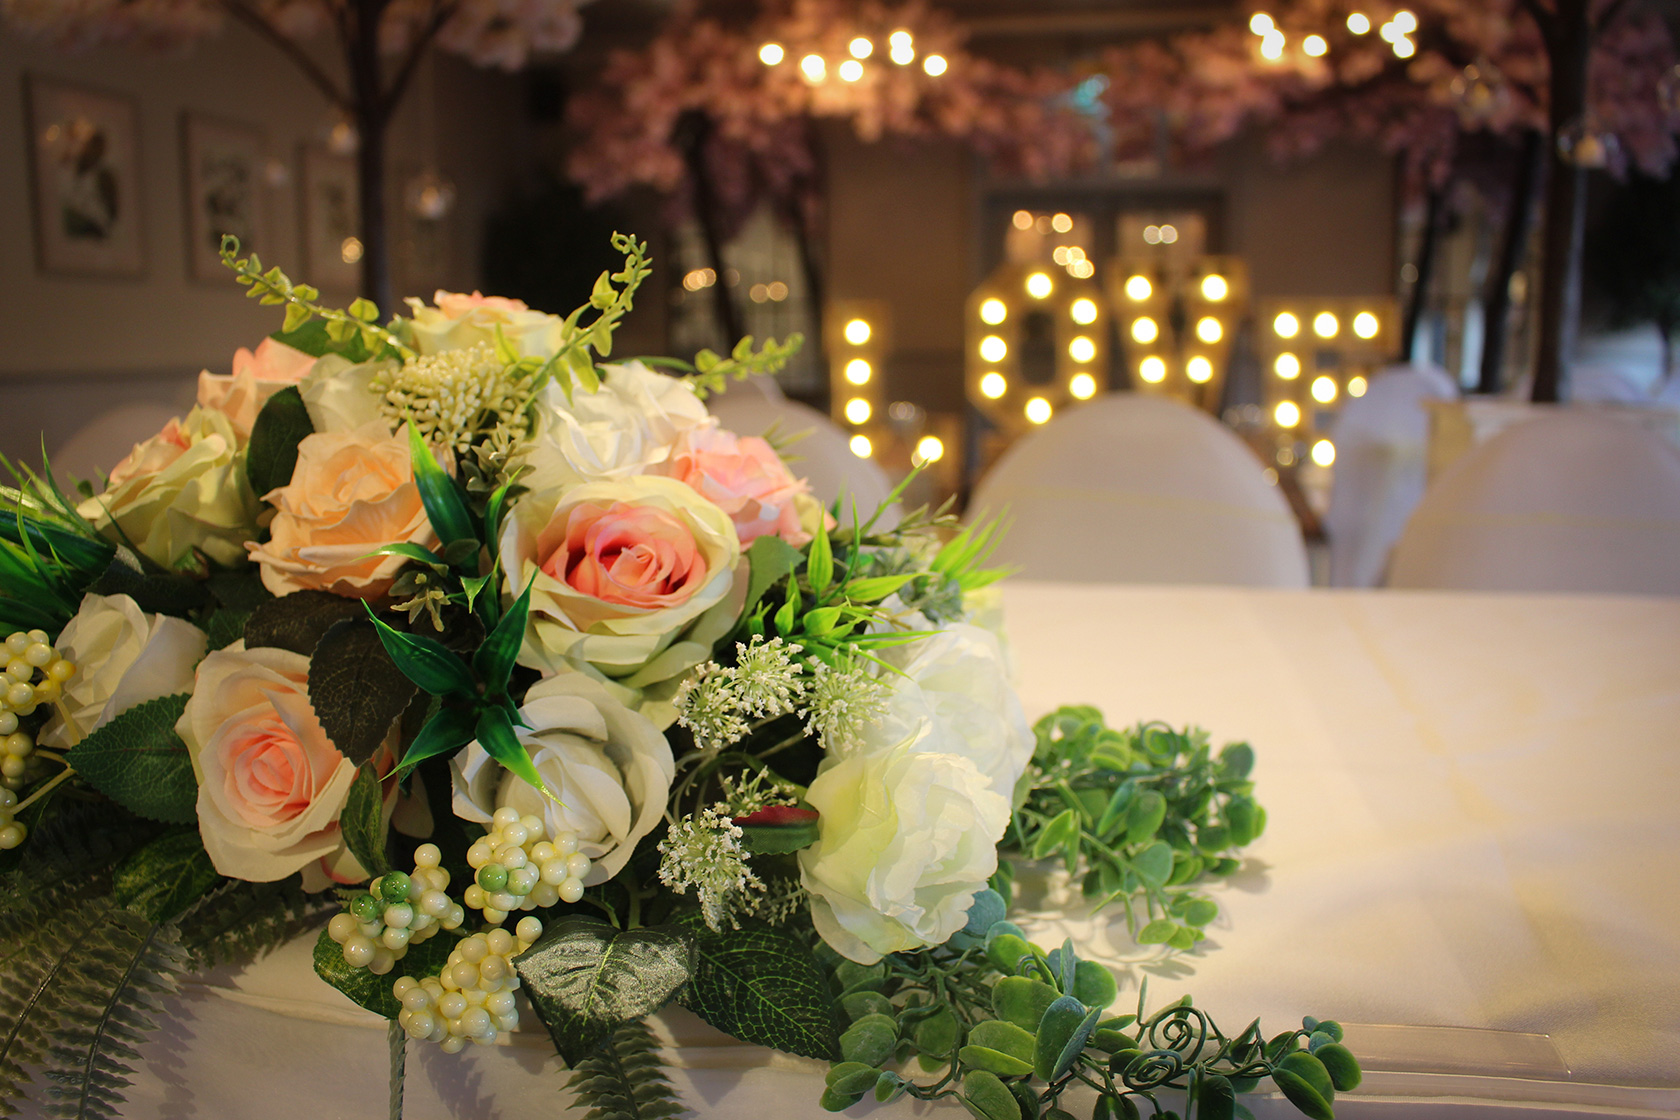 Tailored weddings at the Wynnstay Arms, Ruabon, near Chester